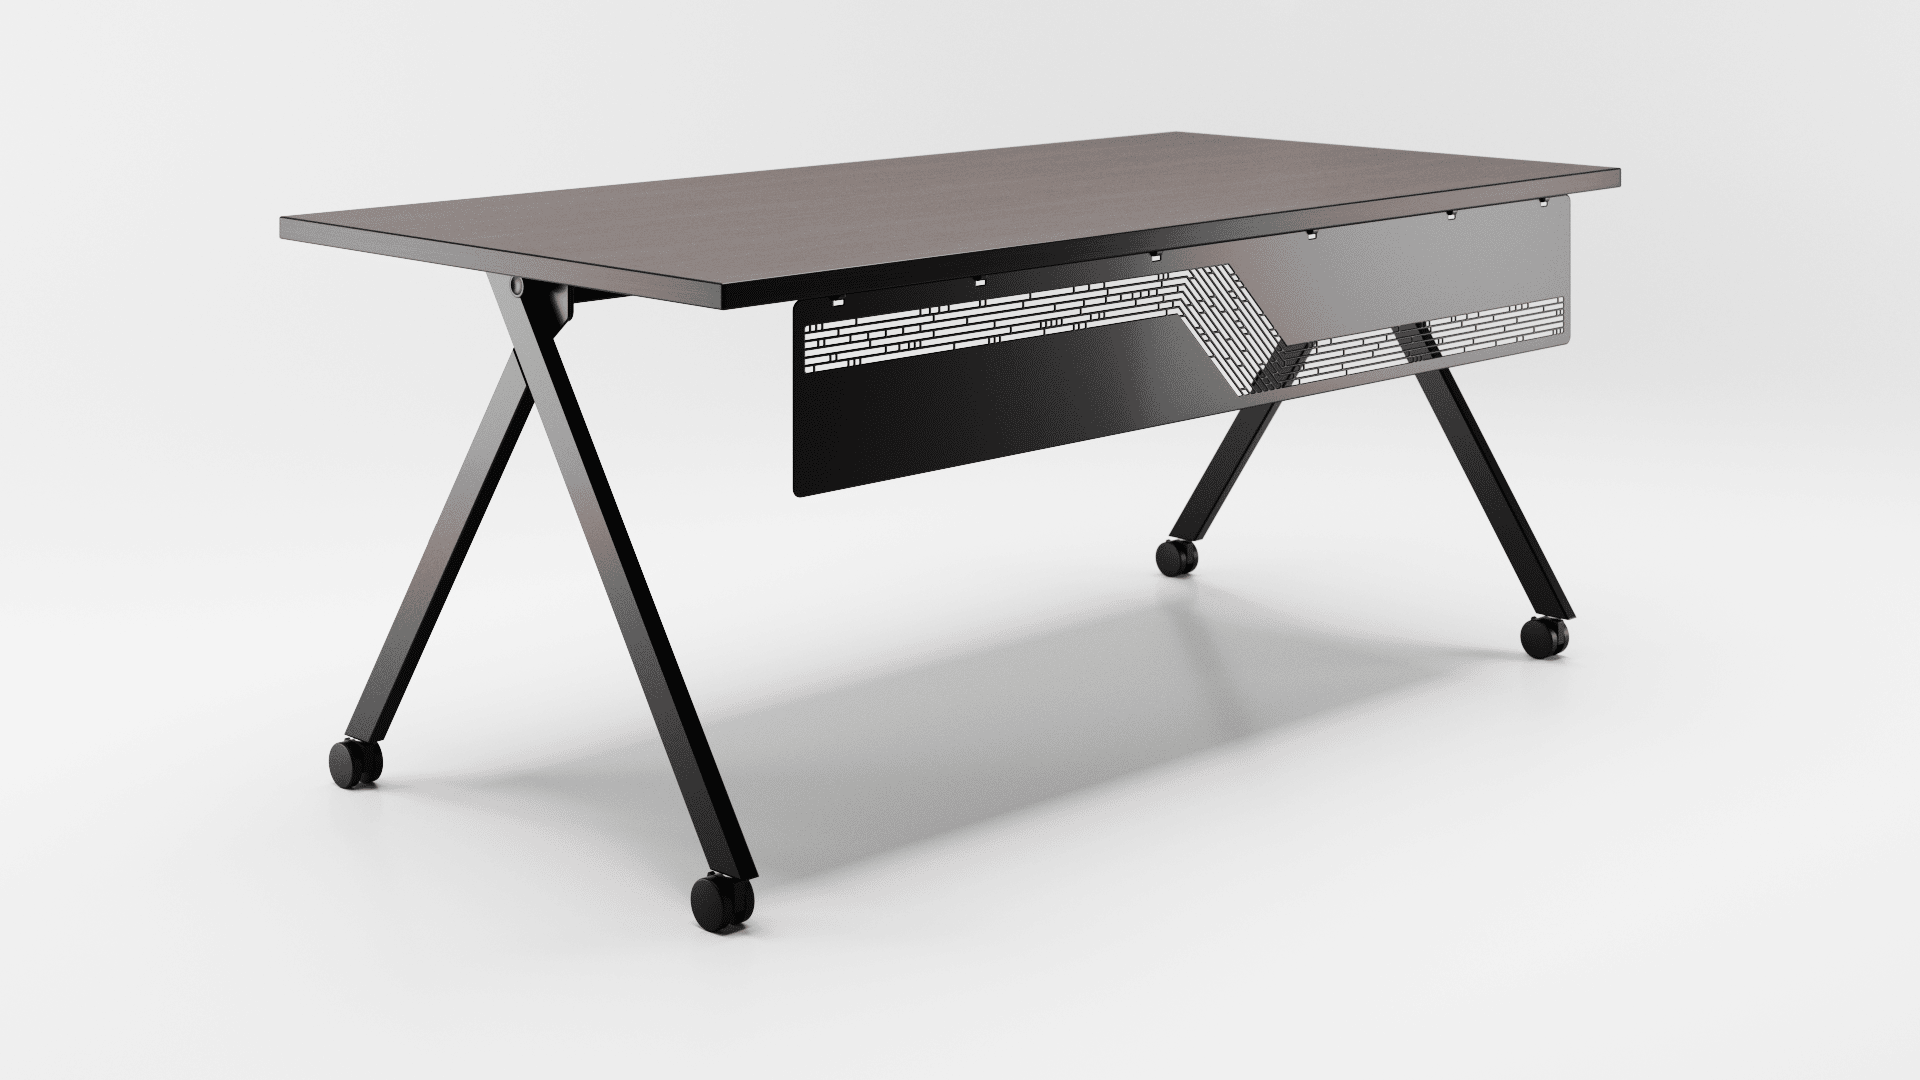 NIM M4 table with front panel